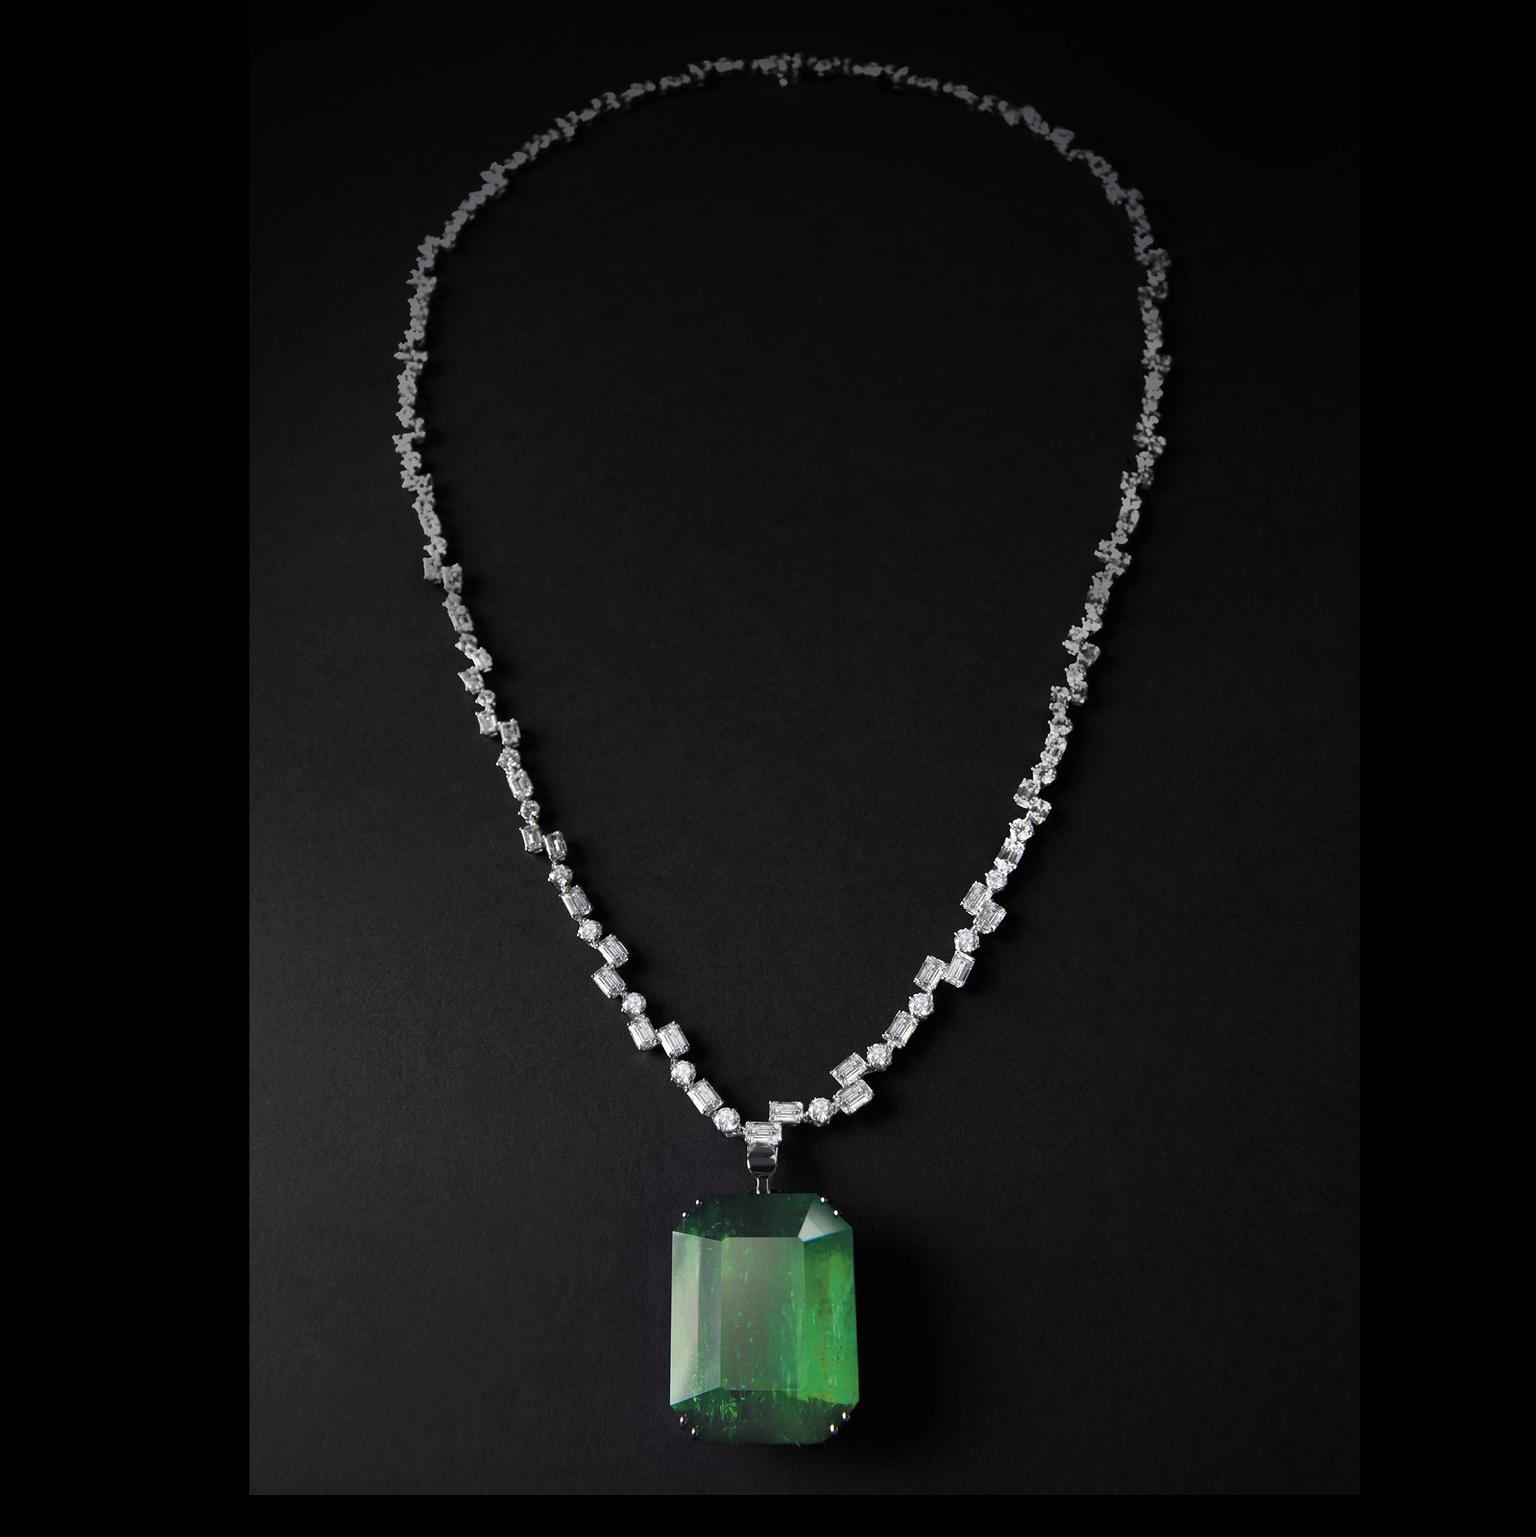 Fantasy Cut emerald necklace by Damiani